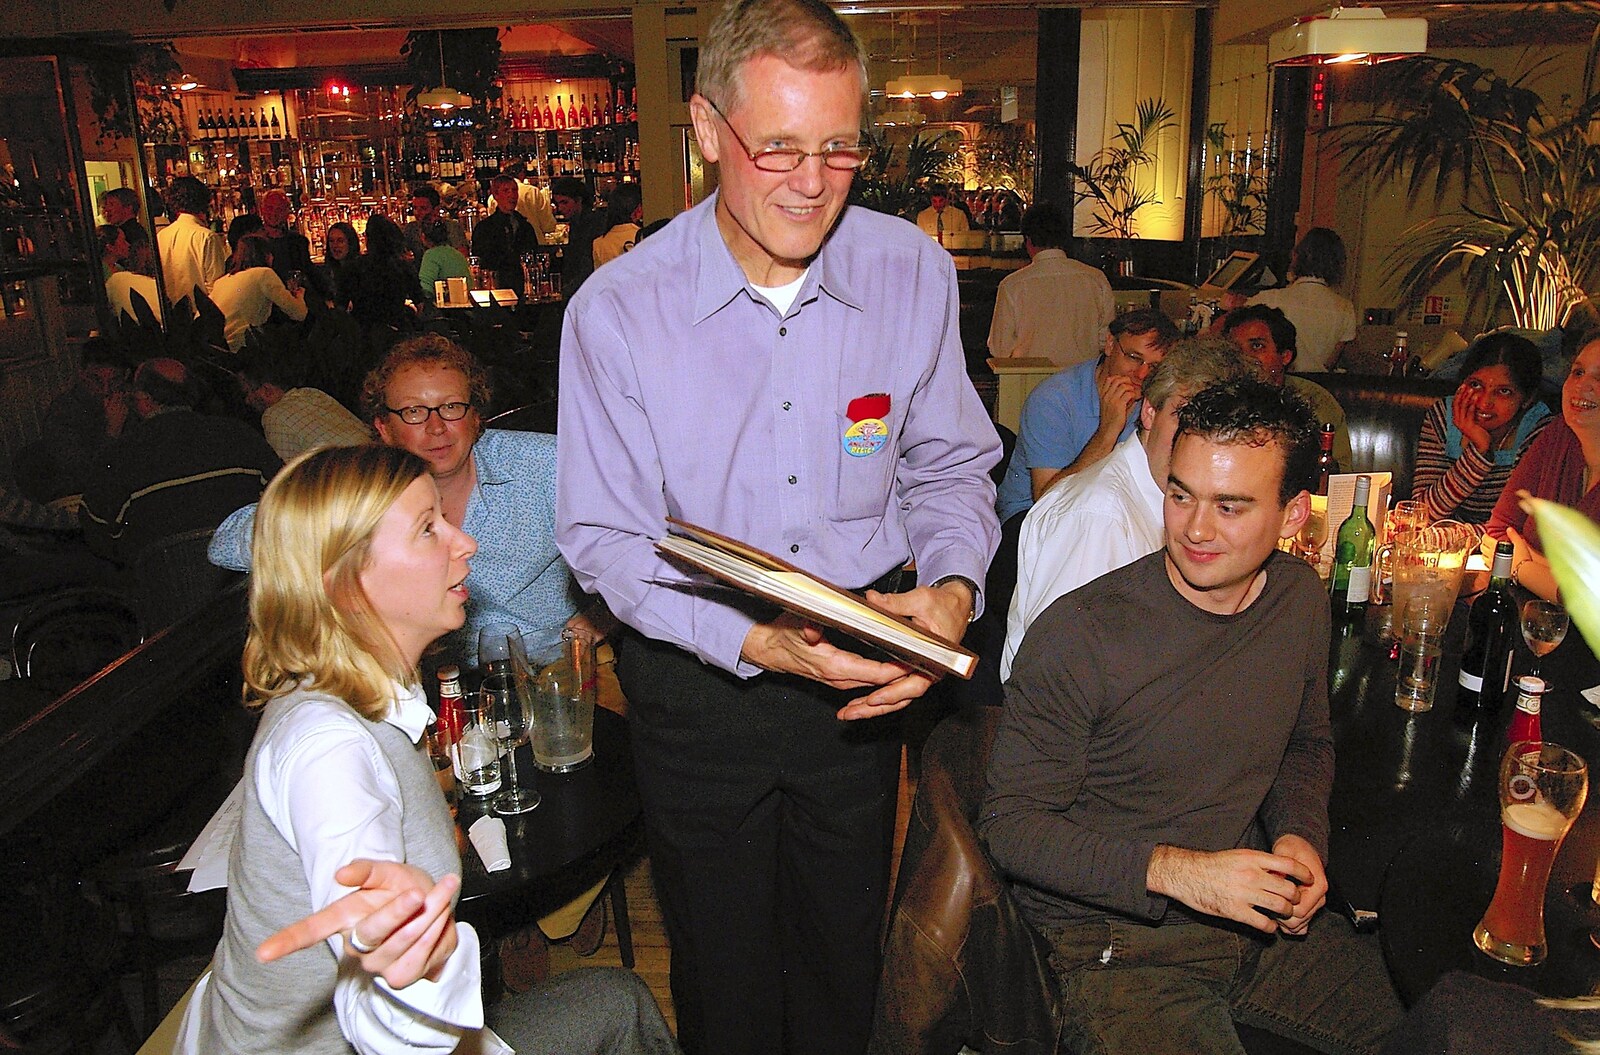 Tim has some sort of book from Tim's 60th Birthday, Brown's Restaurant, Trumpington Road, Cambridge - 16th October 2006